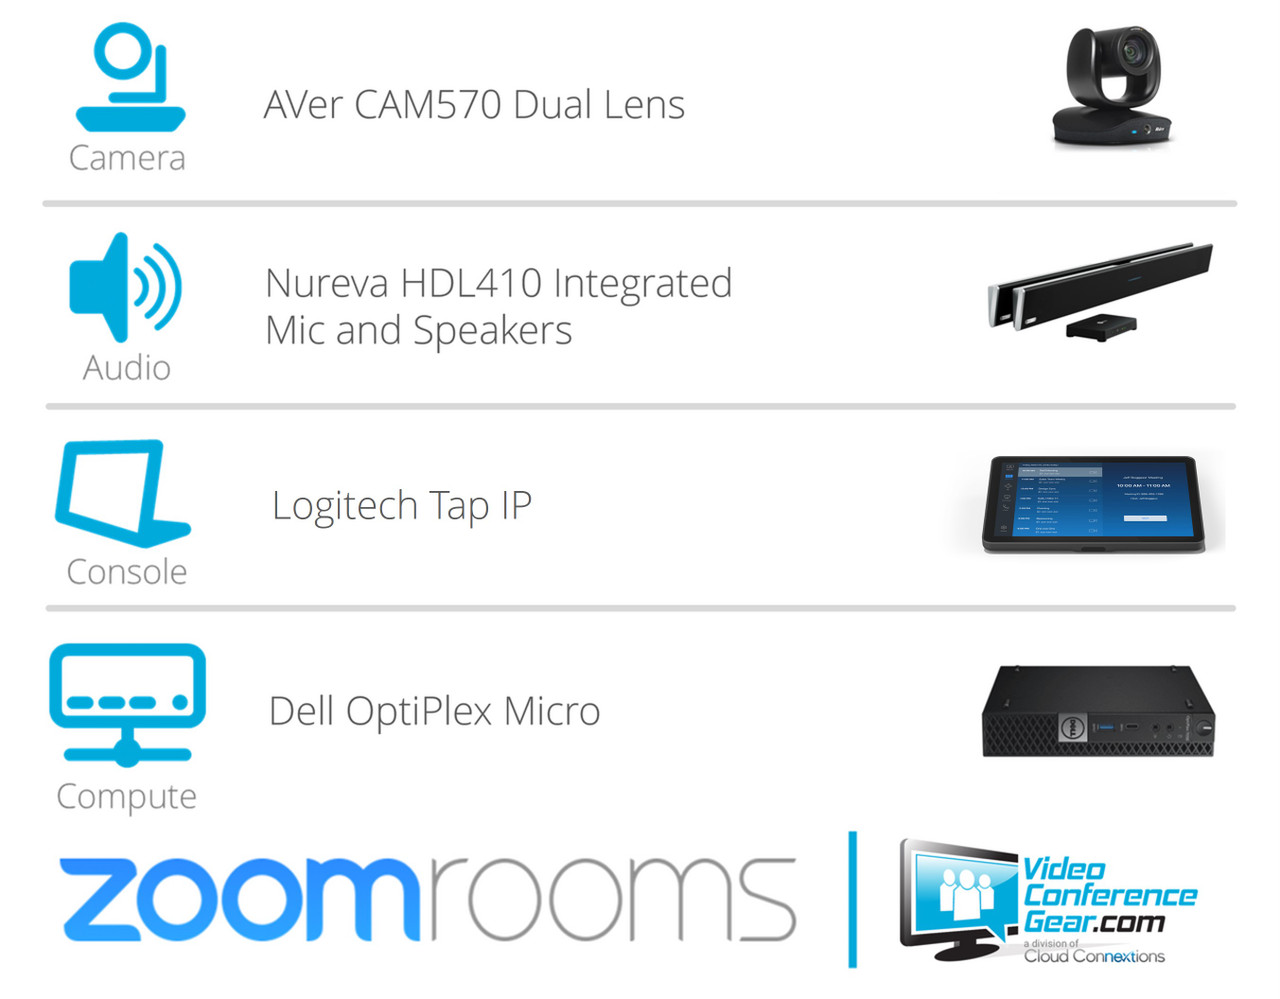 Zoom Rooms Solution with AVer CAM570 and Nureva HDL410 - Large Room